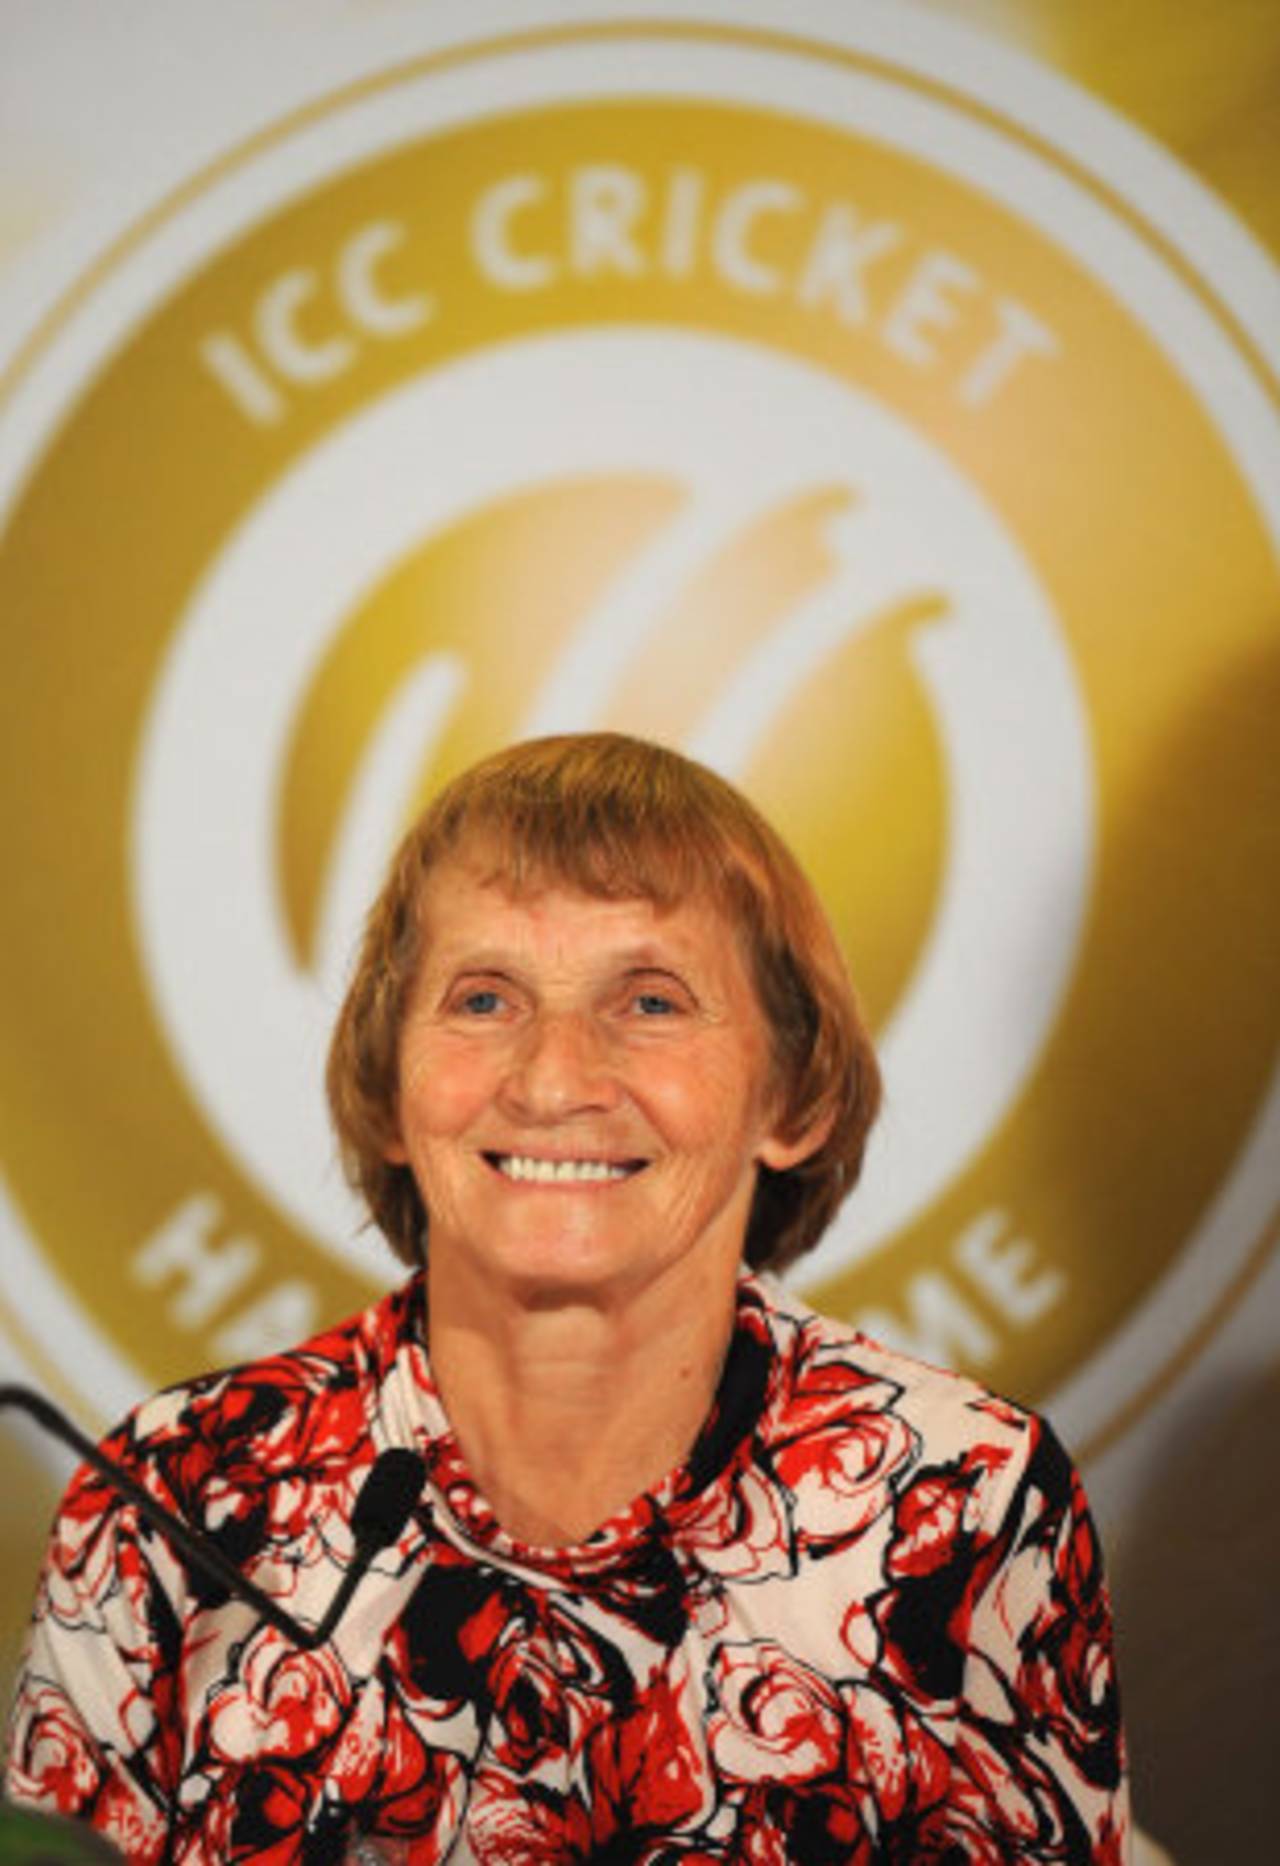 England's Enid Bakewell was inducted into the Cricket Hall of Fame, Colombo, September 14, 2012